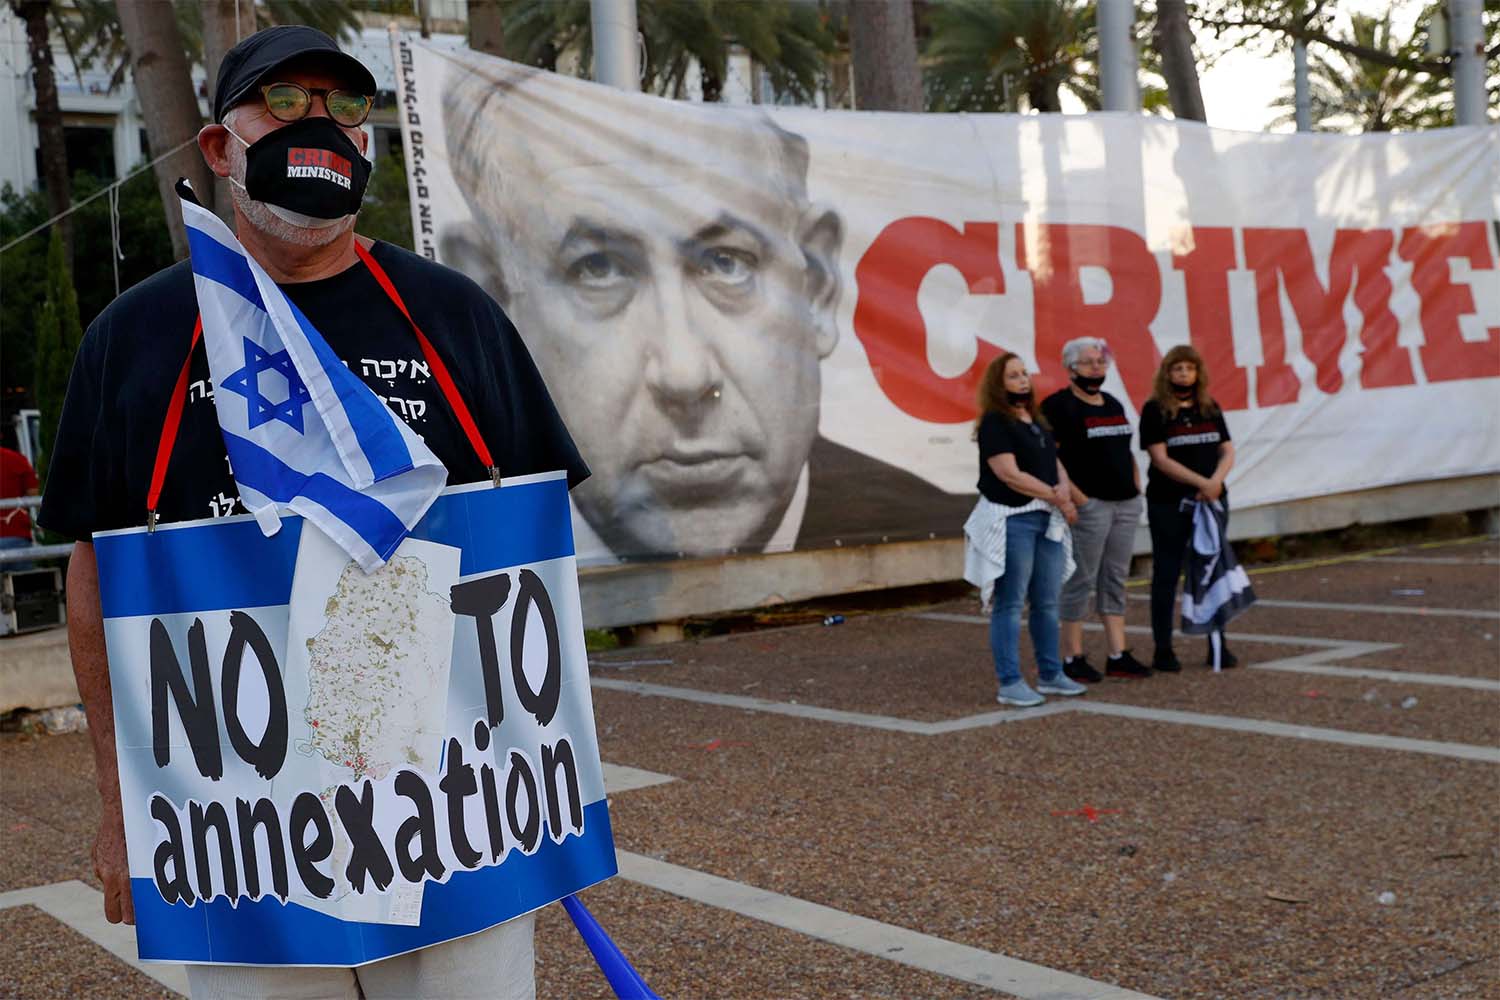 Protesters gather in Tel Aviv's Rabin Square on June 6, 2020, to denounce Israel's plan to annex parts of the occupied West Bank